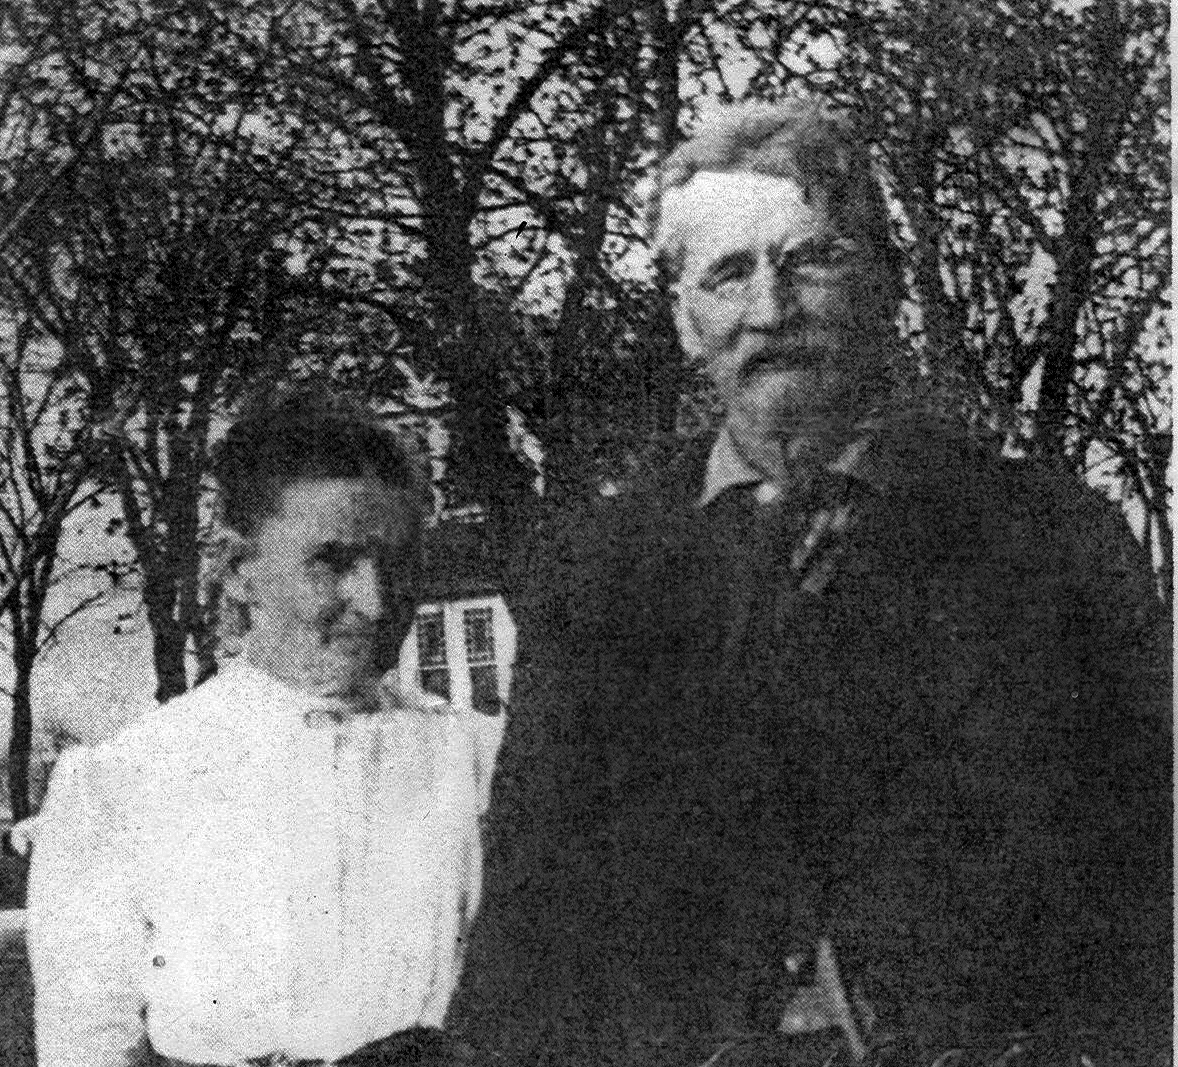 Anna Layng and William Faulkner